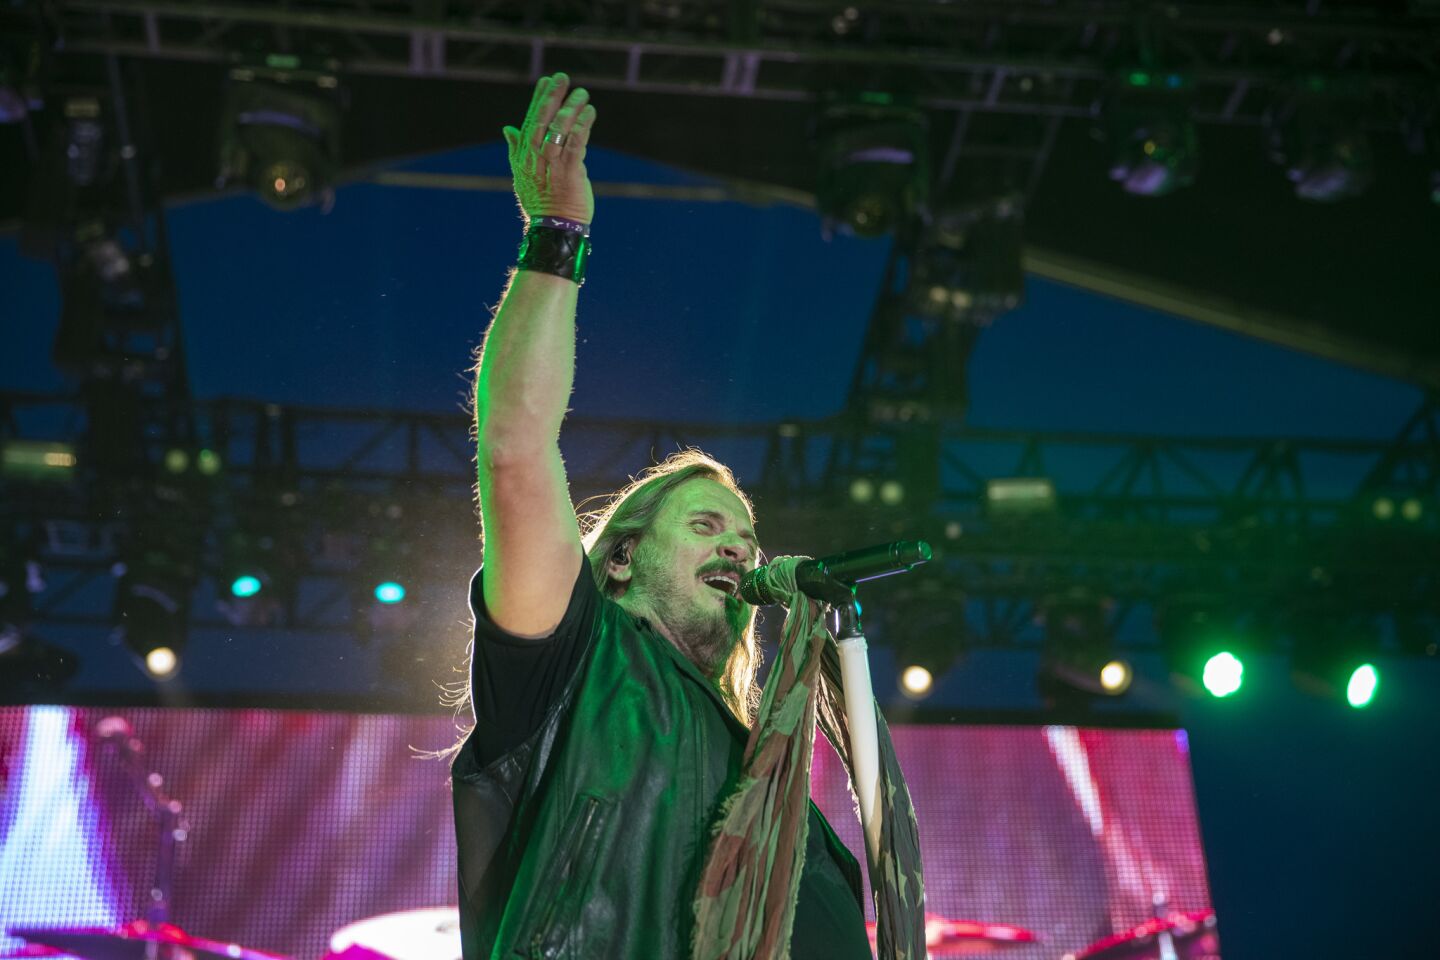 Lynyrd Skynyrd vocalist Johnny Van Zant performs Saturday on the Palomino Stage at Stagecoach festival in Indio.